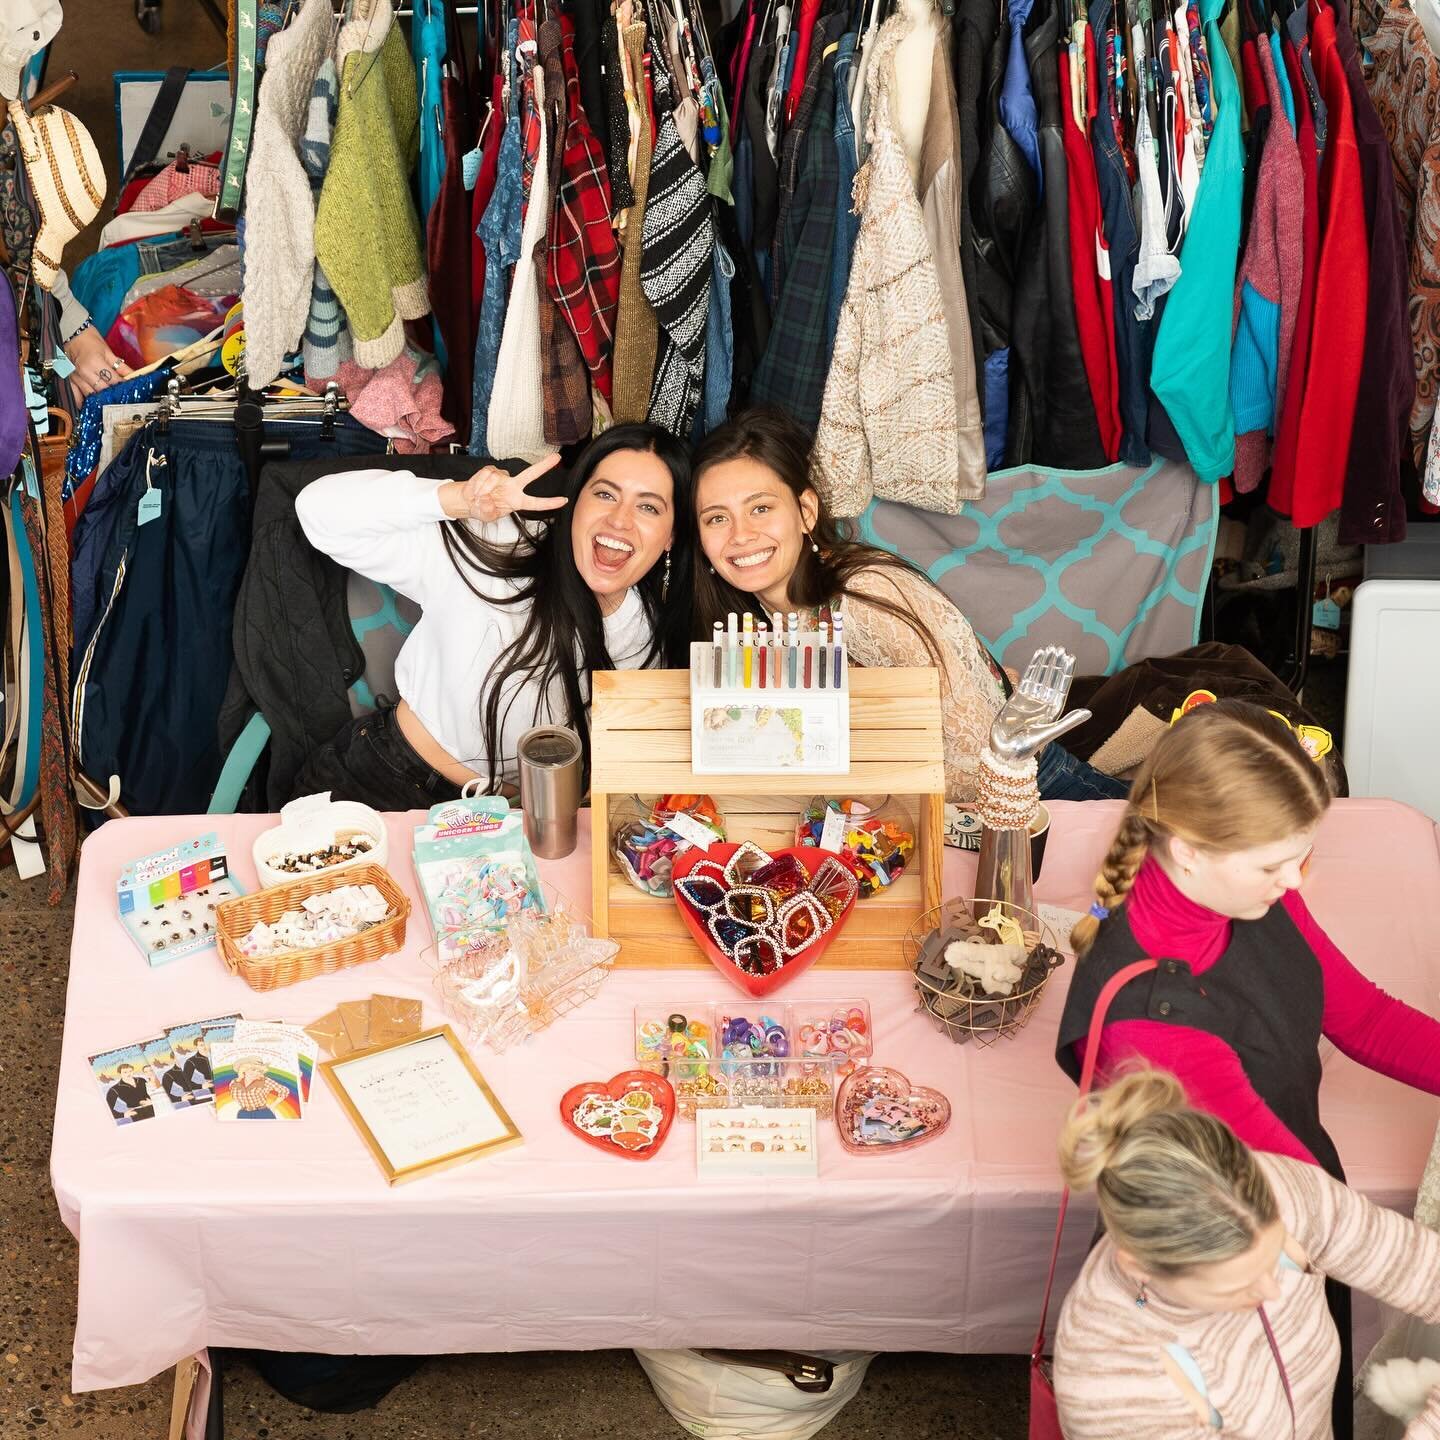 We can barely contain ourselves 😁💗 The MPLS Vintage Market is TOMORROW @machineshopmpls!  Explore endless vintage treasures while you sip on @edinacoffeeroasters ☕️coffee. Arrive at 11 am with a ($10) Early Bird tix you&rsquo;ll receive FREE coffee